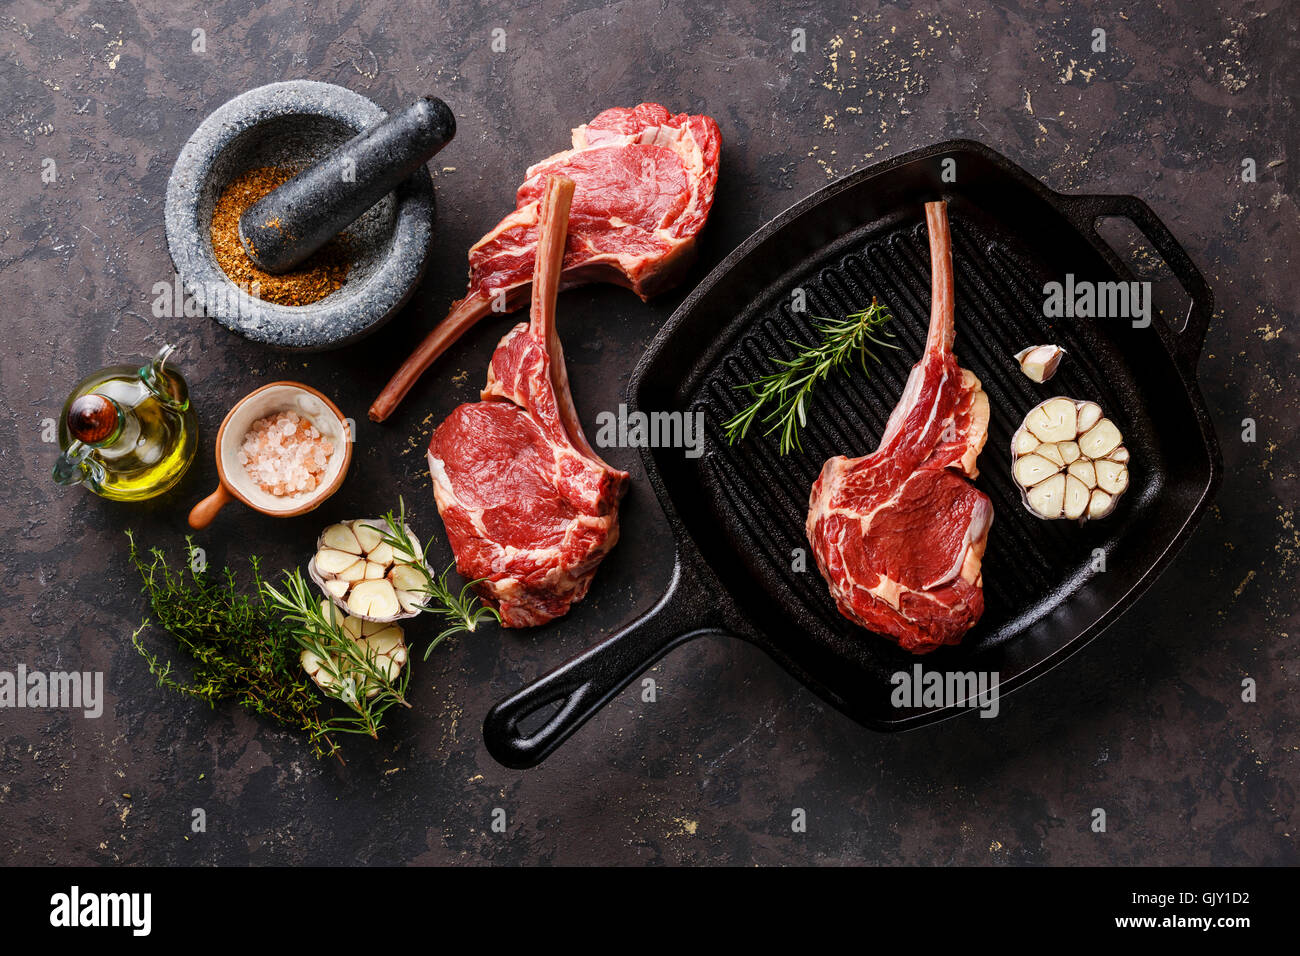 Raw fresh meat Veal ribs with ingredients on frying cast iron Grill pan Stock Photo